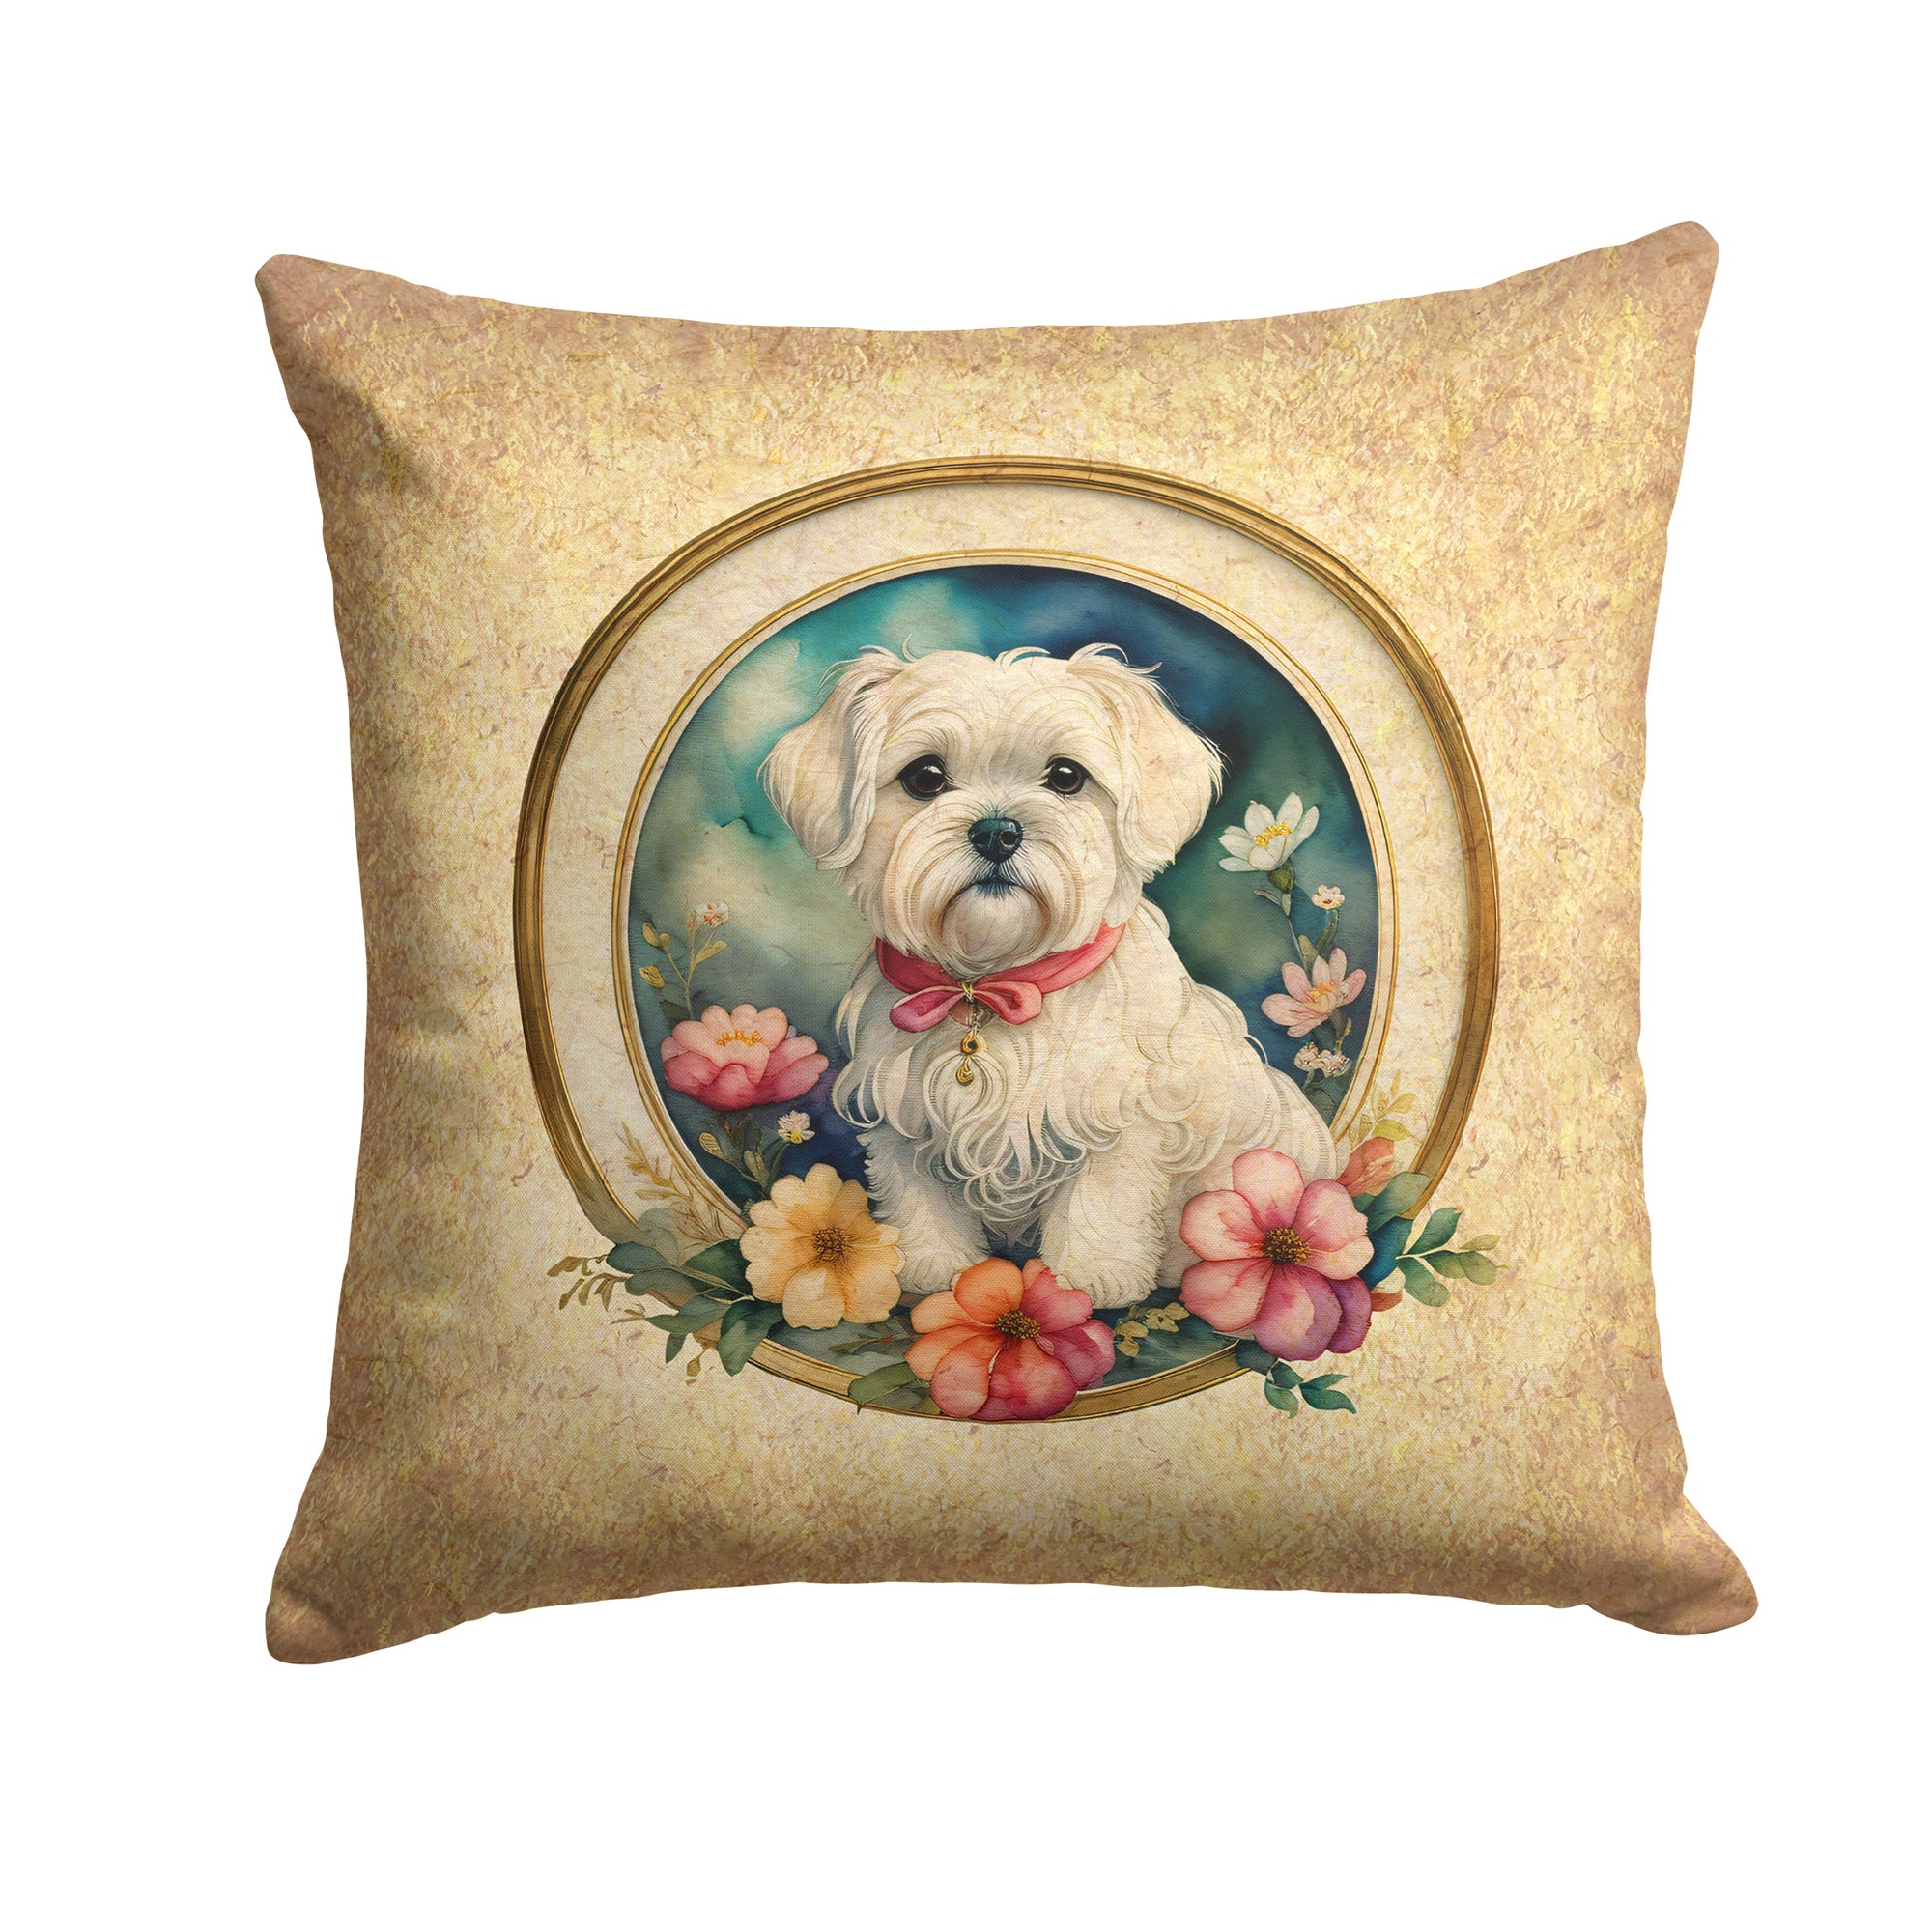 Buy this Maltese and Flowers Fabric Decorative Pillow